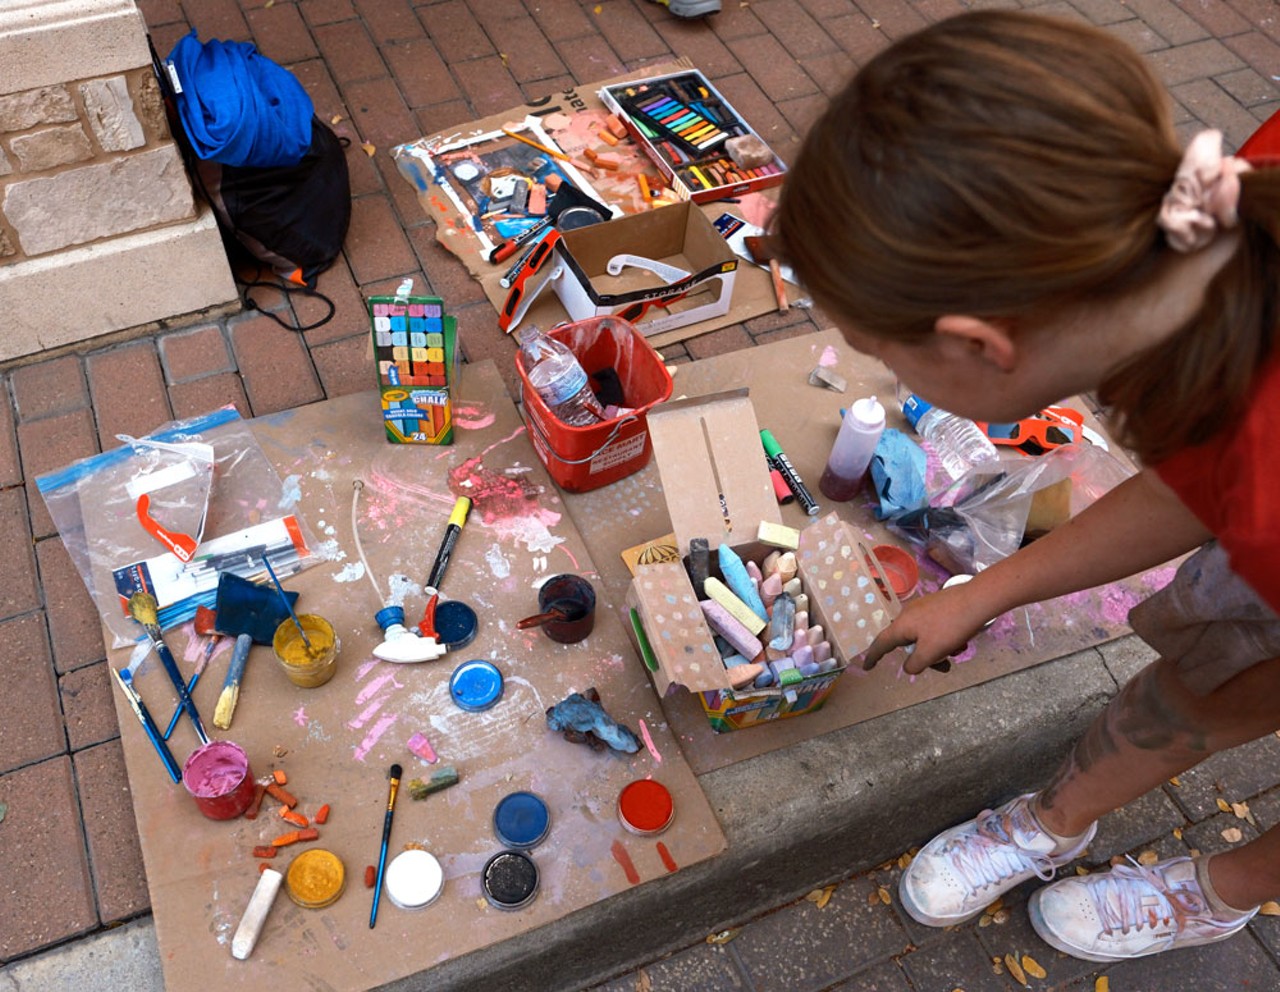 All the most creative moments from Artpace's Chalk It Up 2022